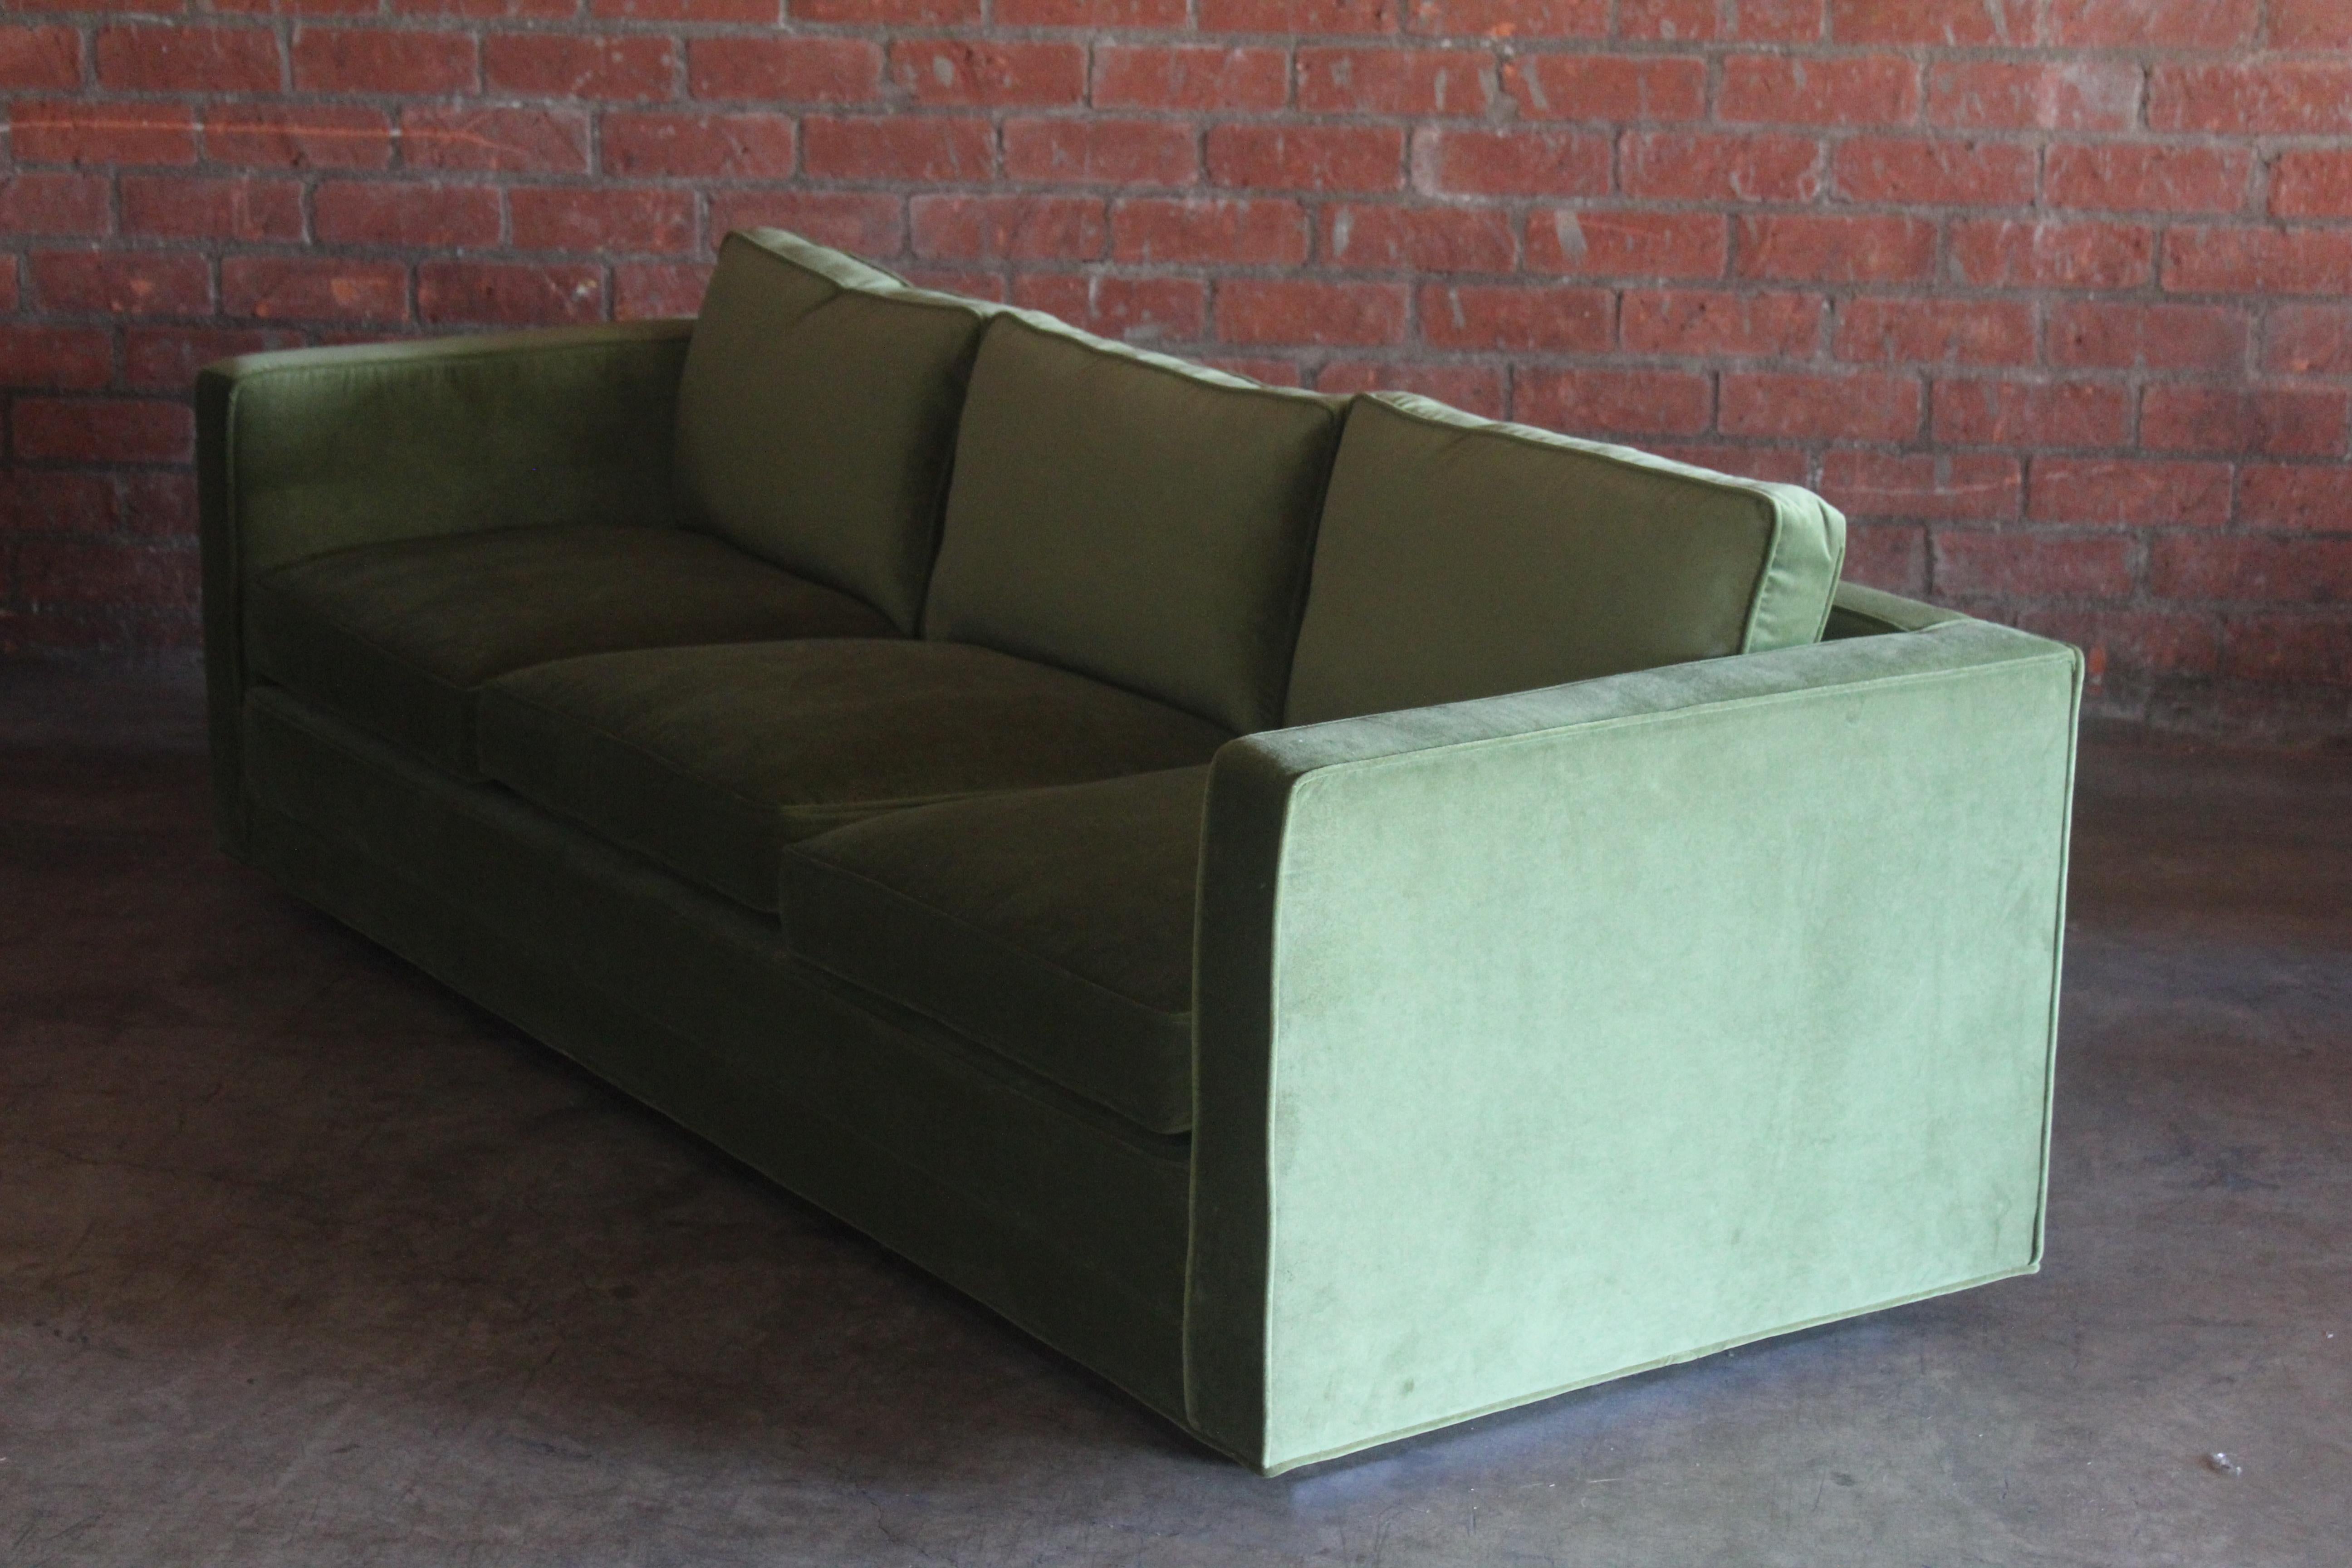 Tuxedo Sofa by Edward Wormley for Dunbar, 1950s. Pair Available, Sold Separately 2